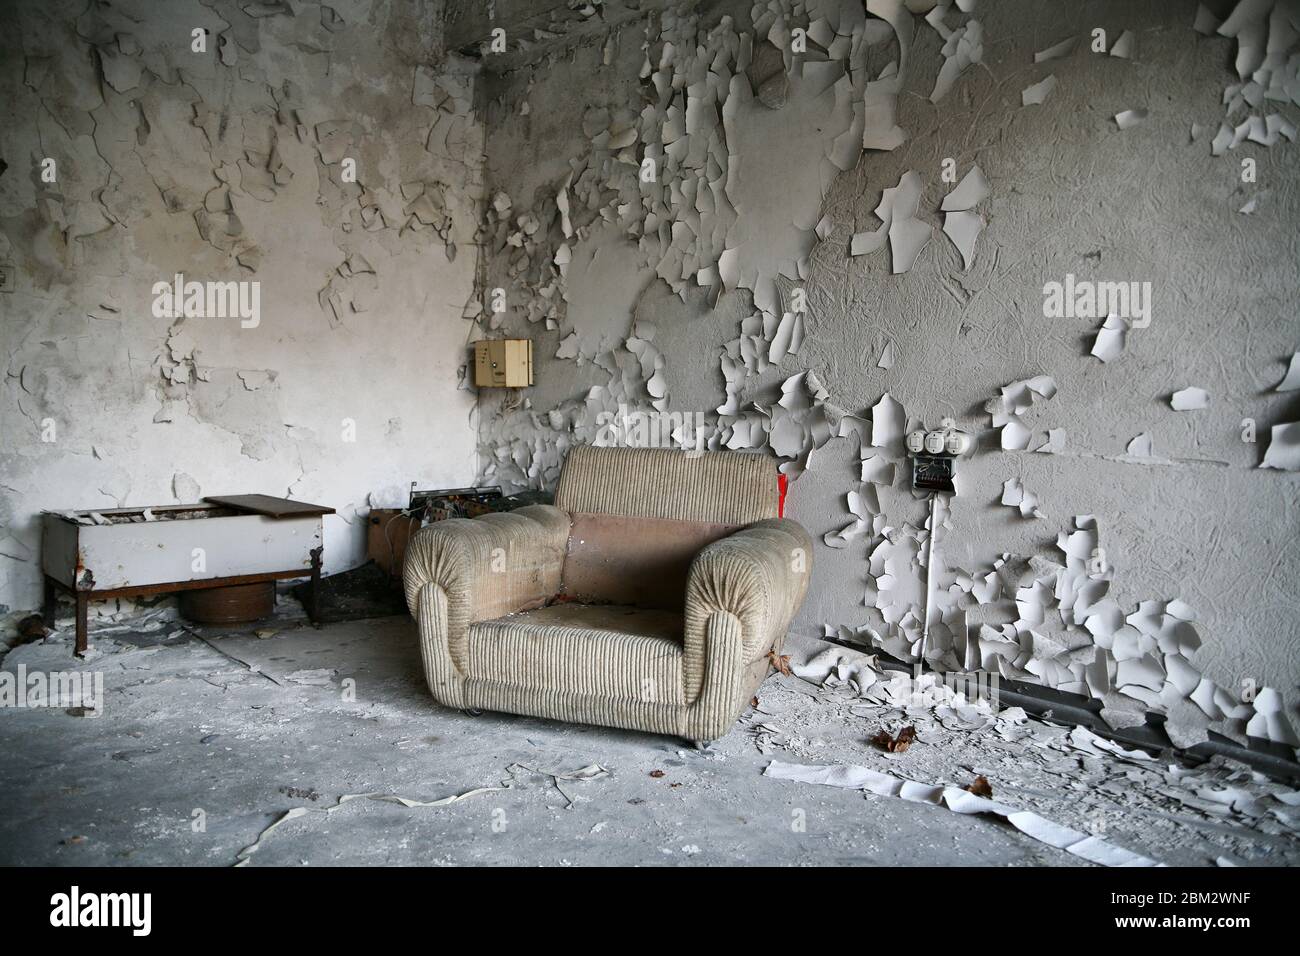 Damaged old armchair in an abandoned interior Stock Photo